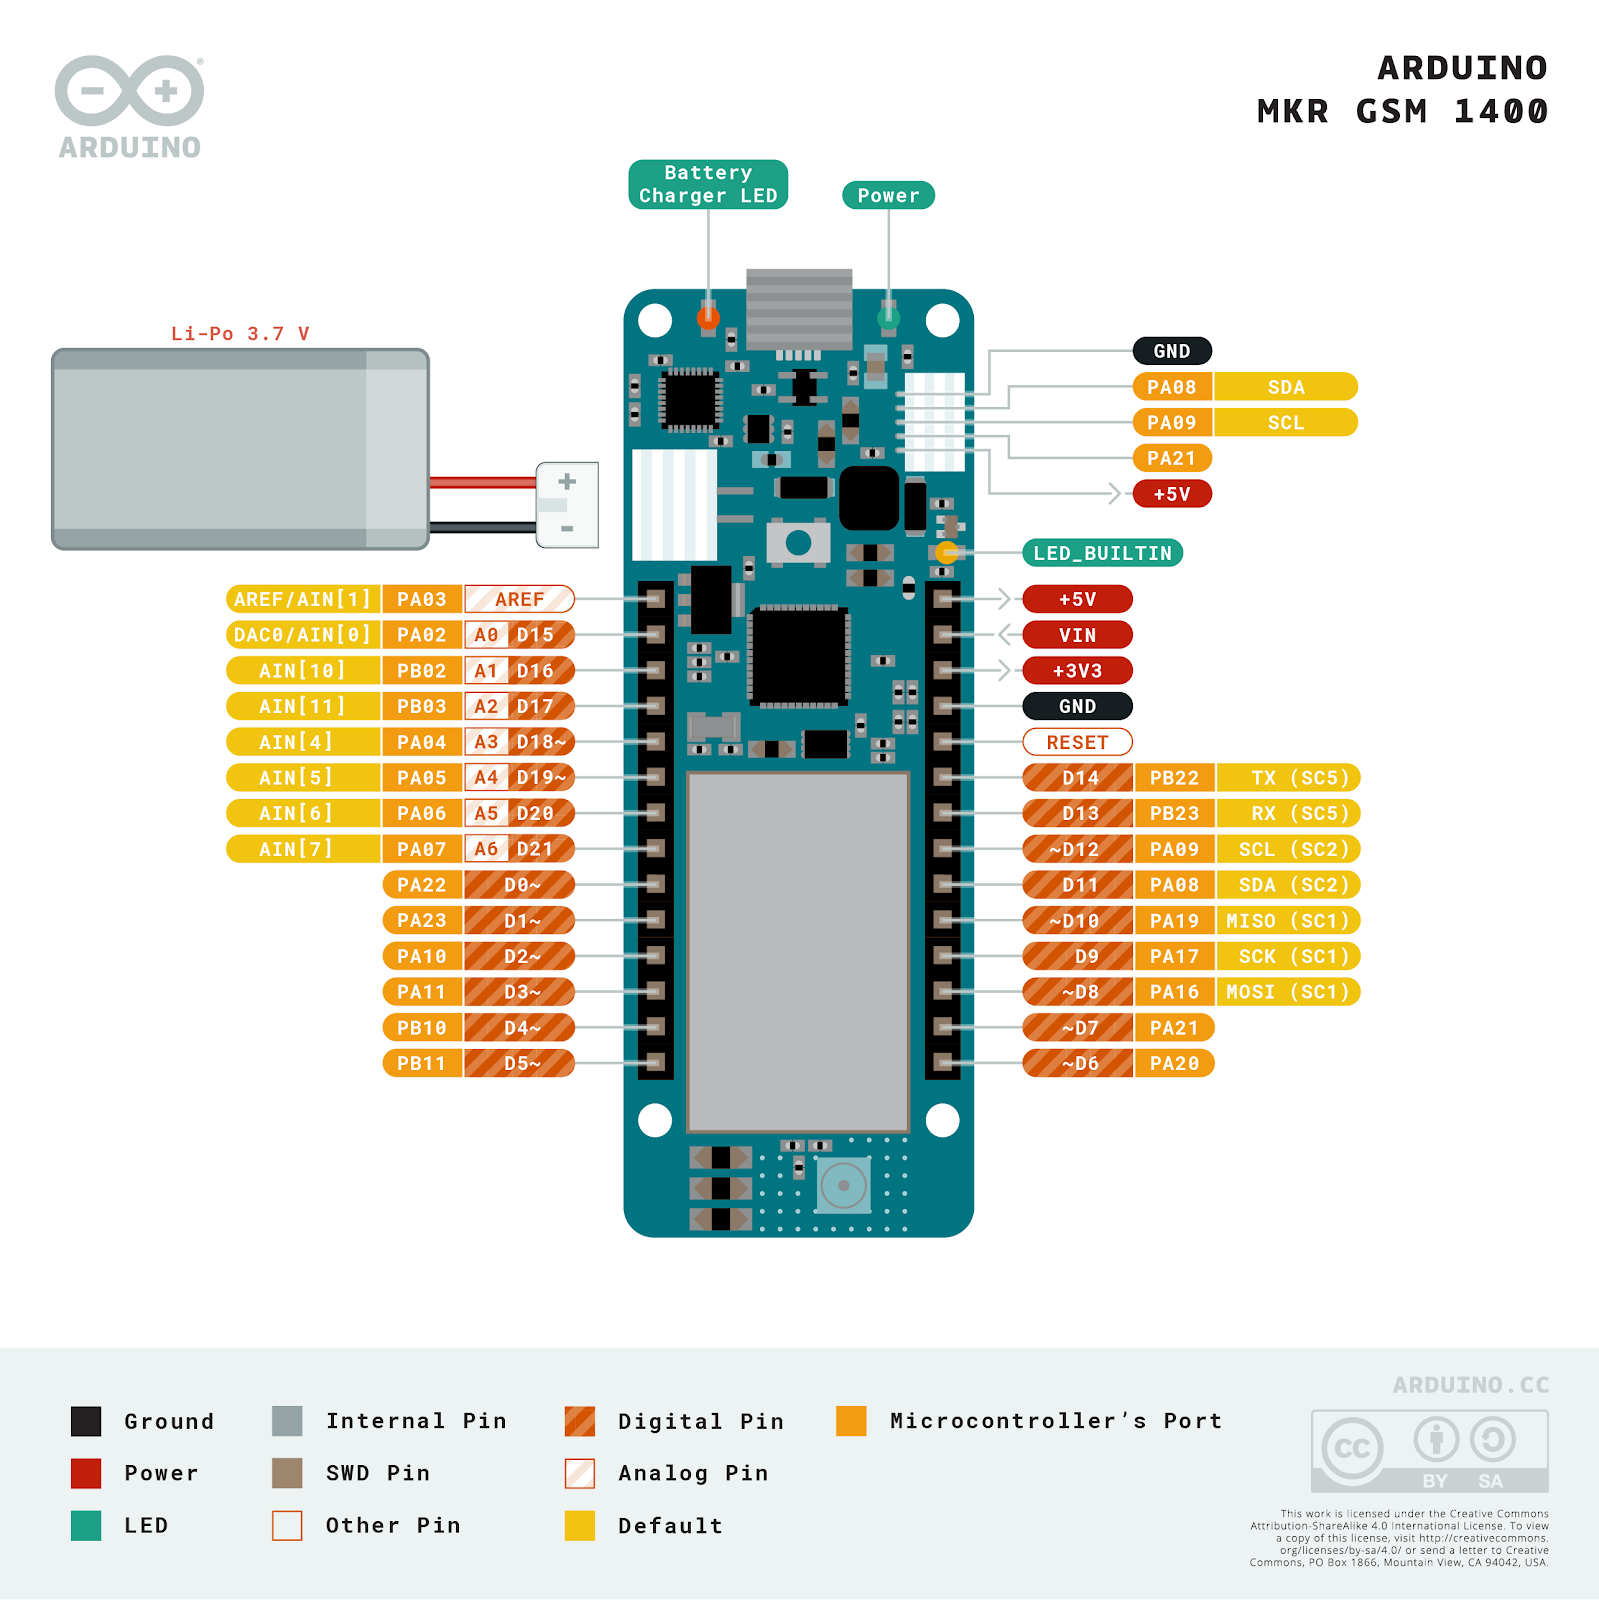 Arduino MKR GSM 1400 pinout diagram with labels